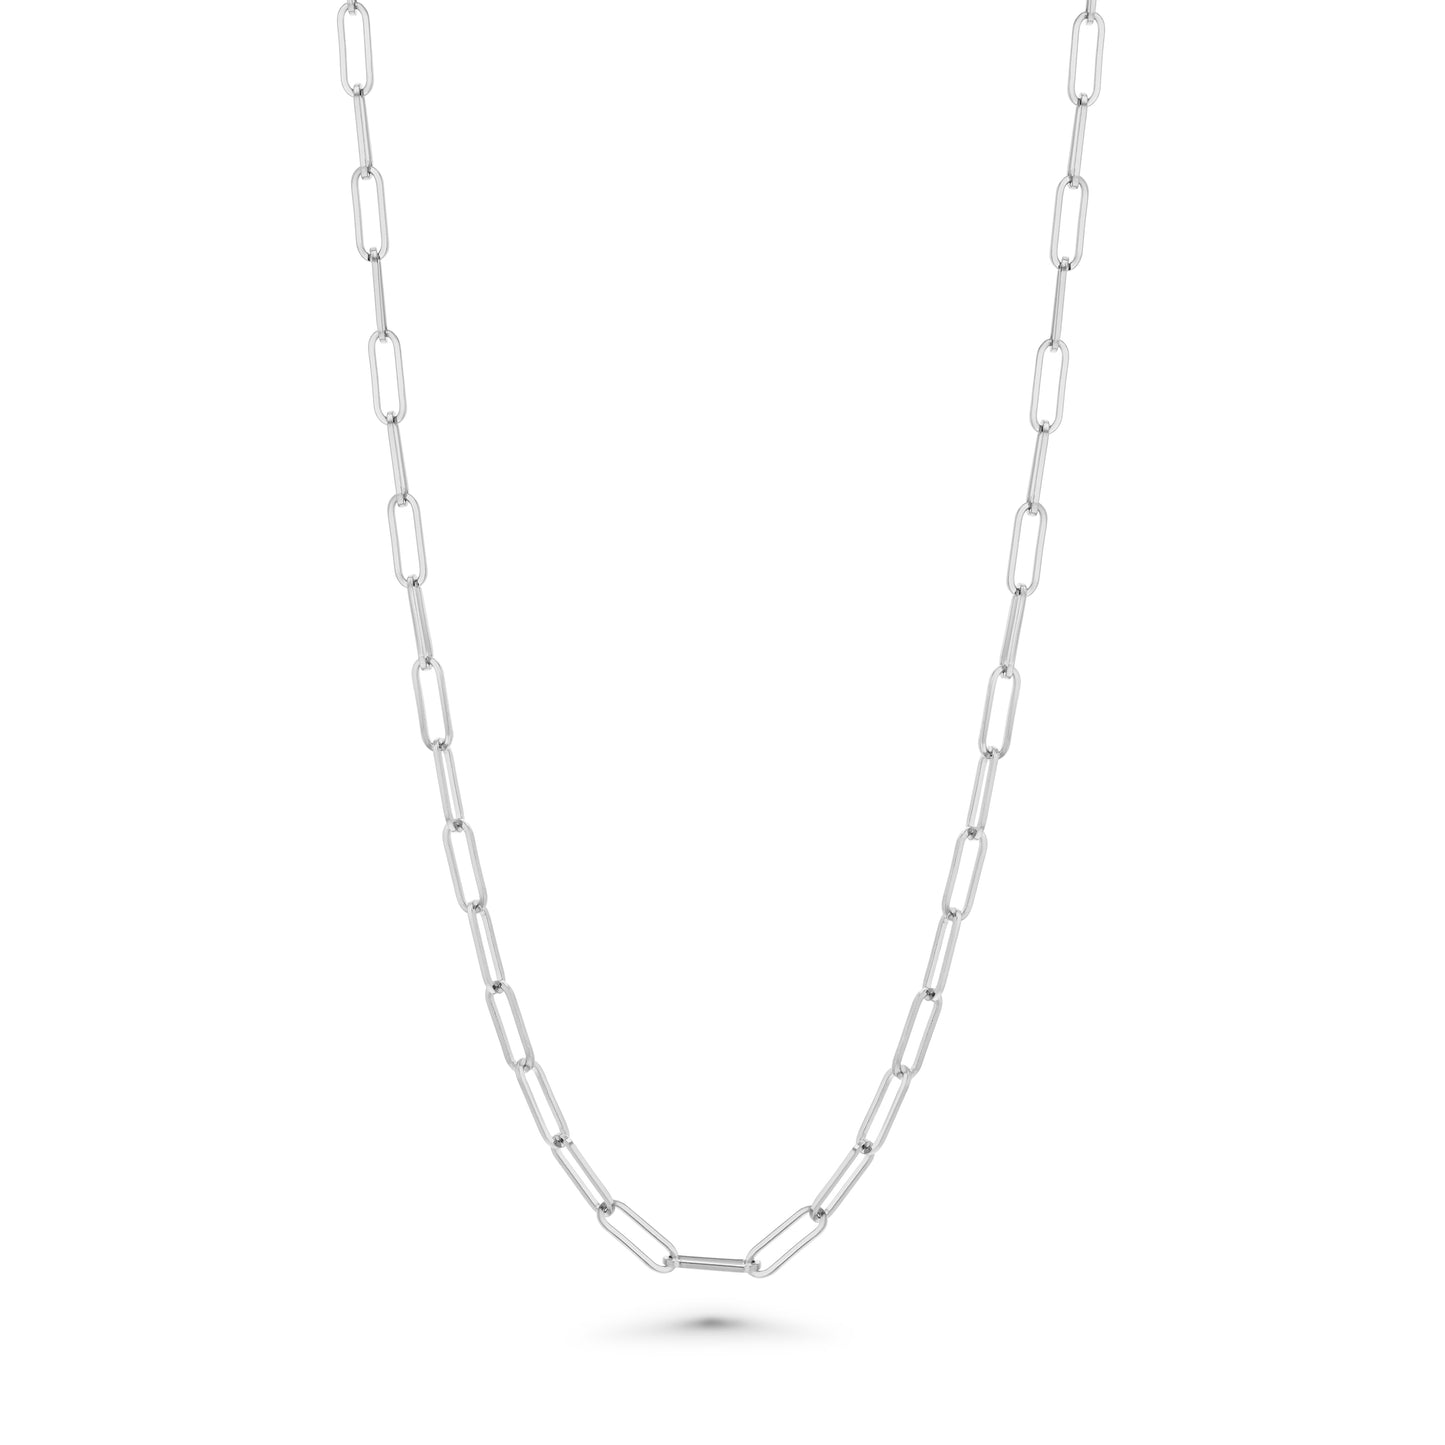 LARGE STAPLE CHAIN NECKLACE